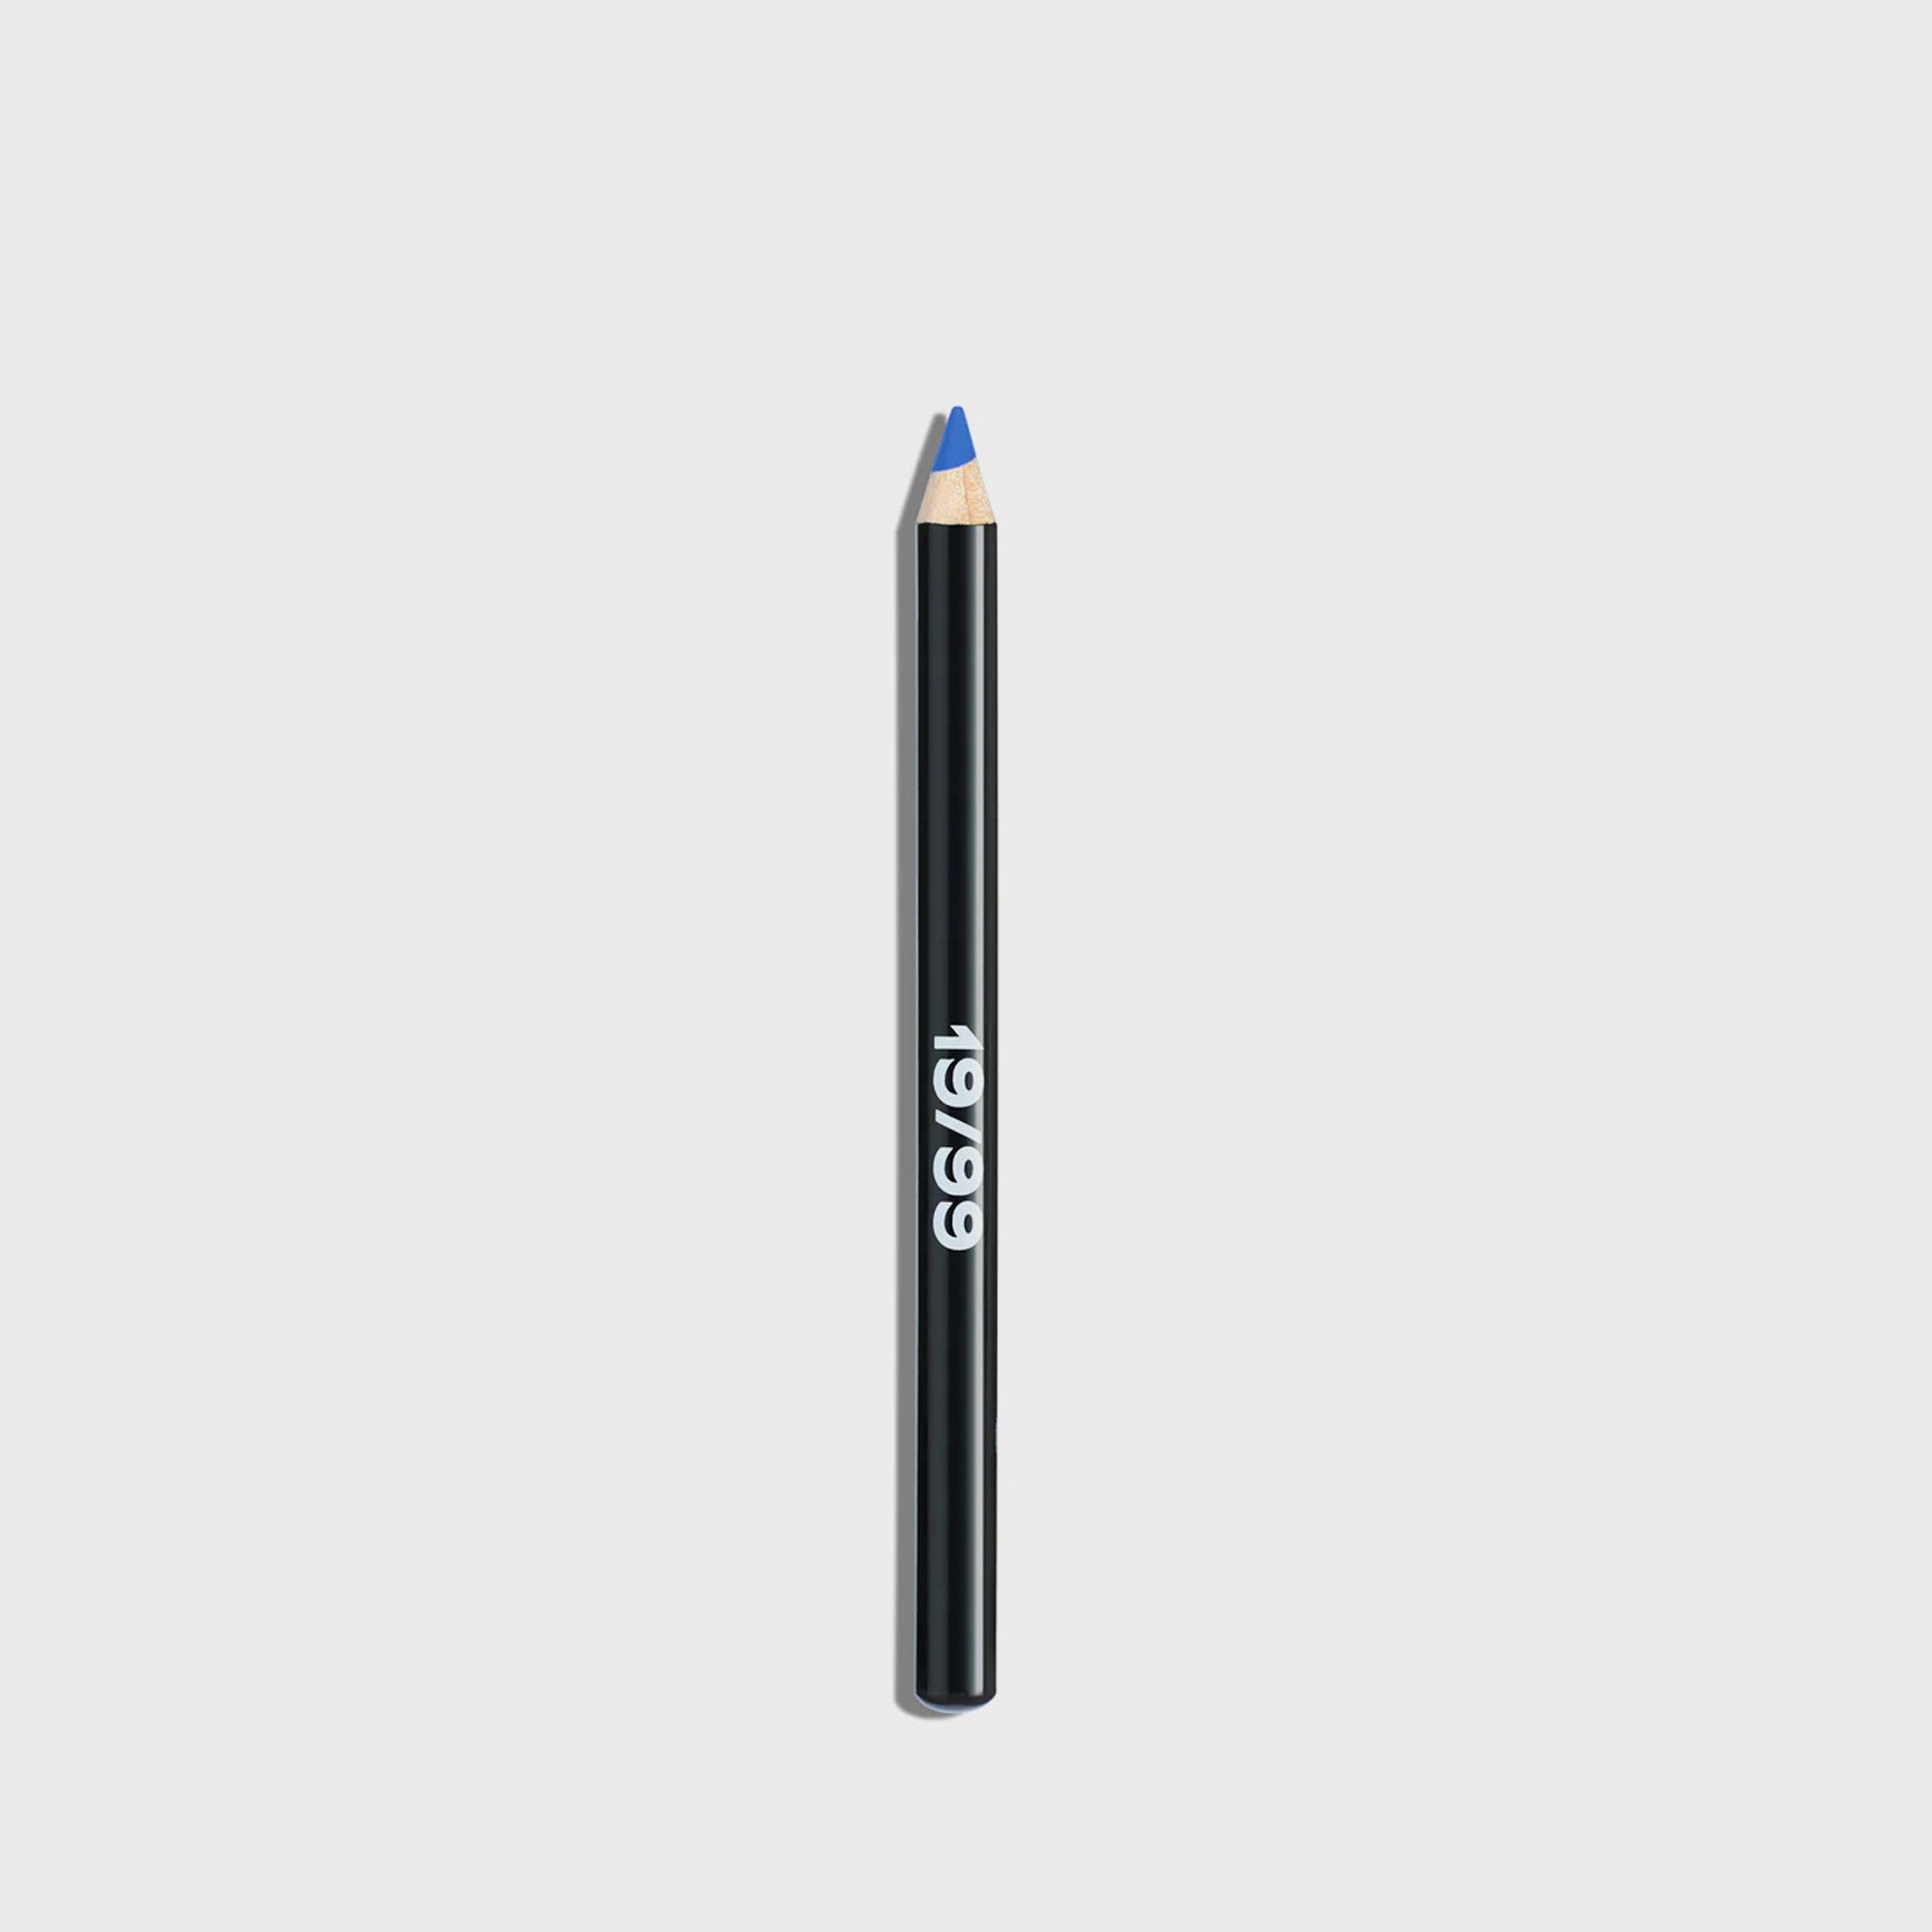 Makeup pencil in cerulean blue by 19/99, with a black casing and bold 19/99 logo printed on the side of the pencil.